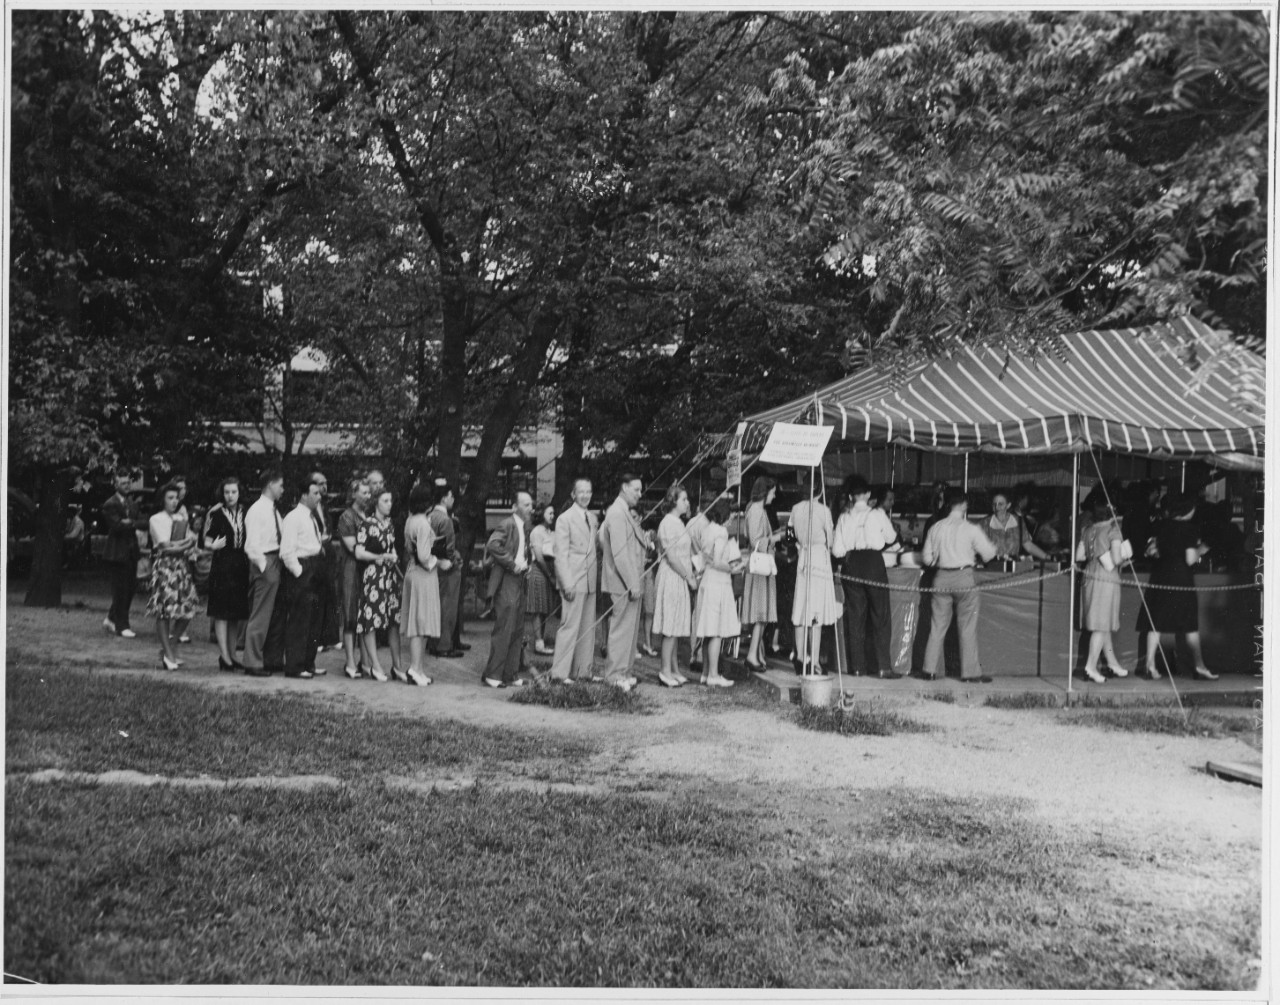 People in line at outdoor cafeteria, Washington, DC